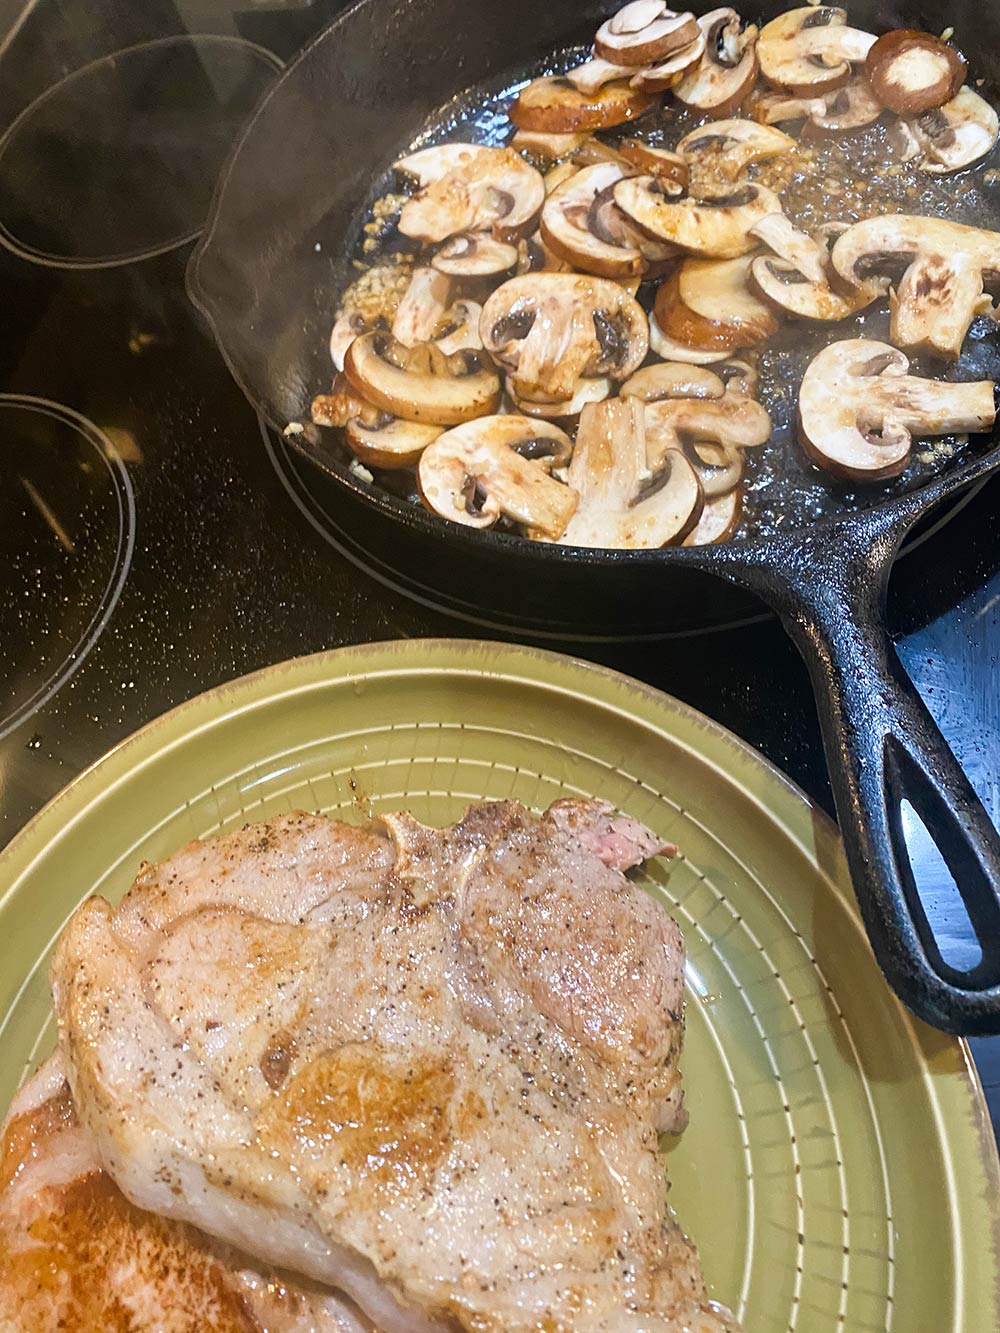 Bacon and Mushroom Pork Chops in Cream Sauce (Low Carb) Recipe from Oregon Valley Farm